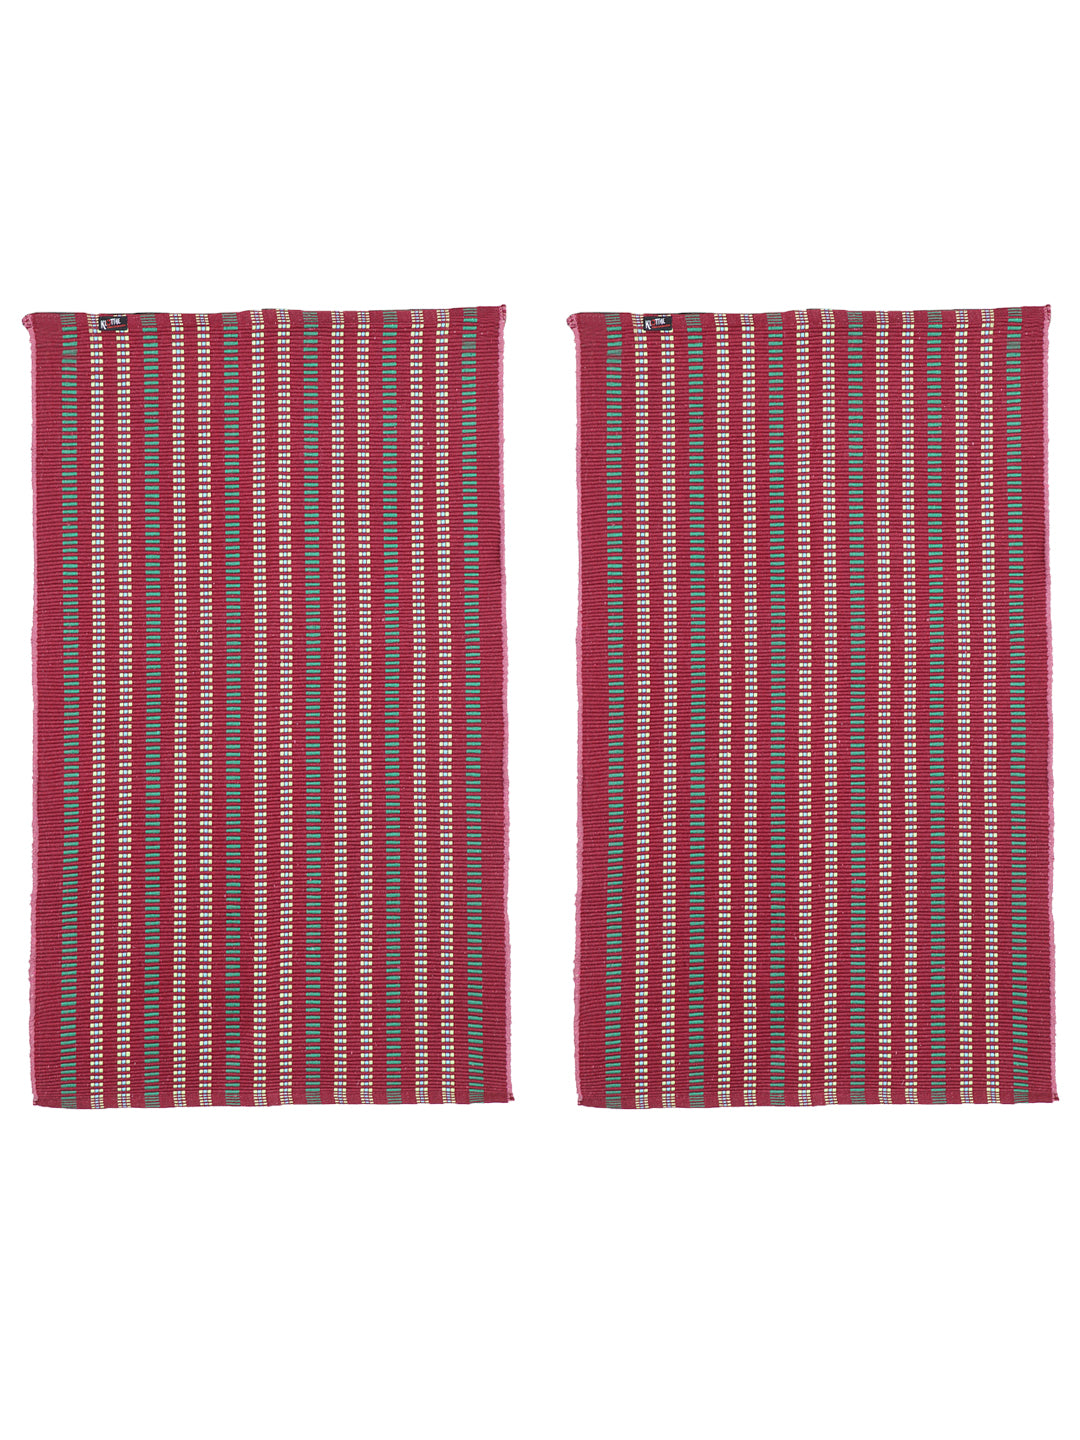 KLOTTHE Set of Two Red Cotton Rugs 60X90 cm